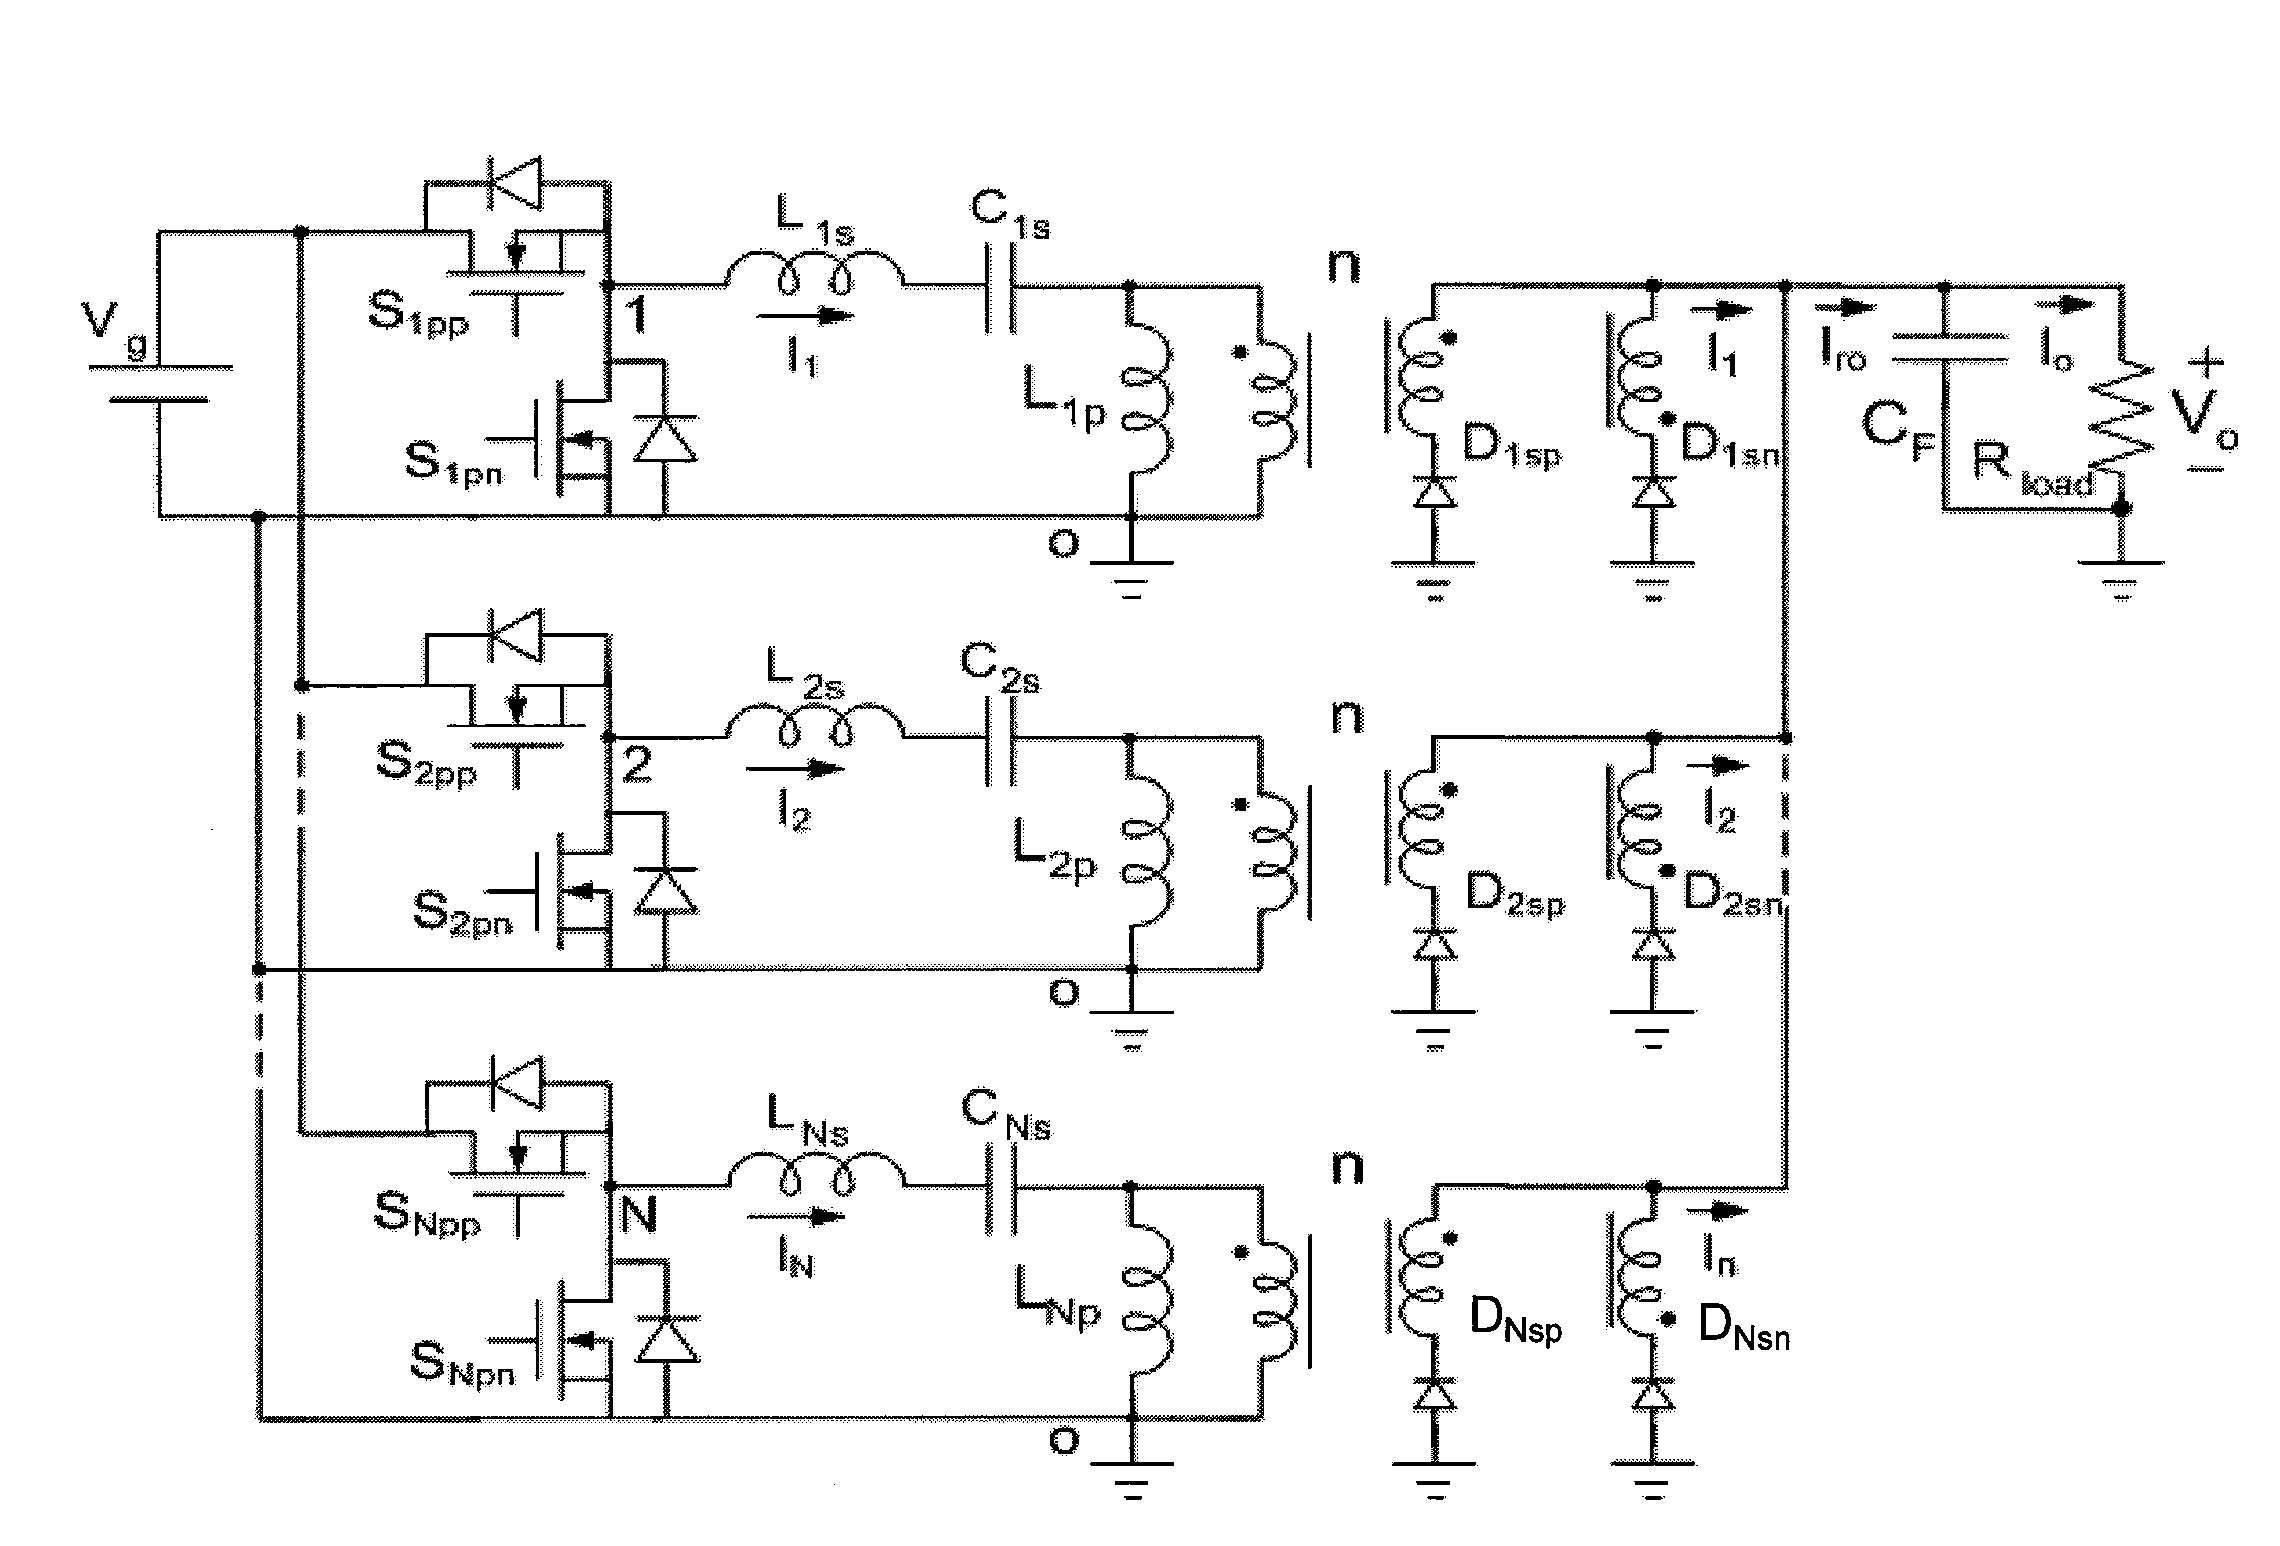 Multiphase resonant converter for dc-dc applications